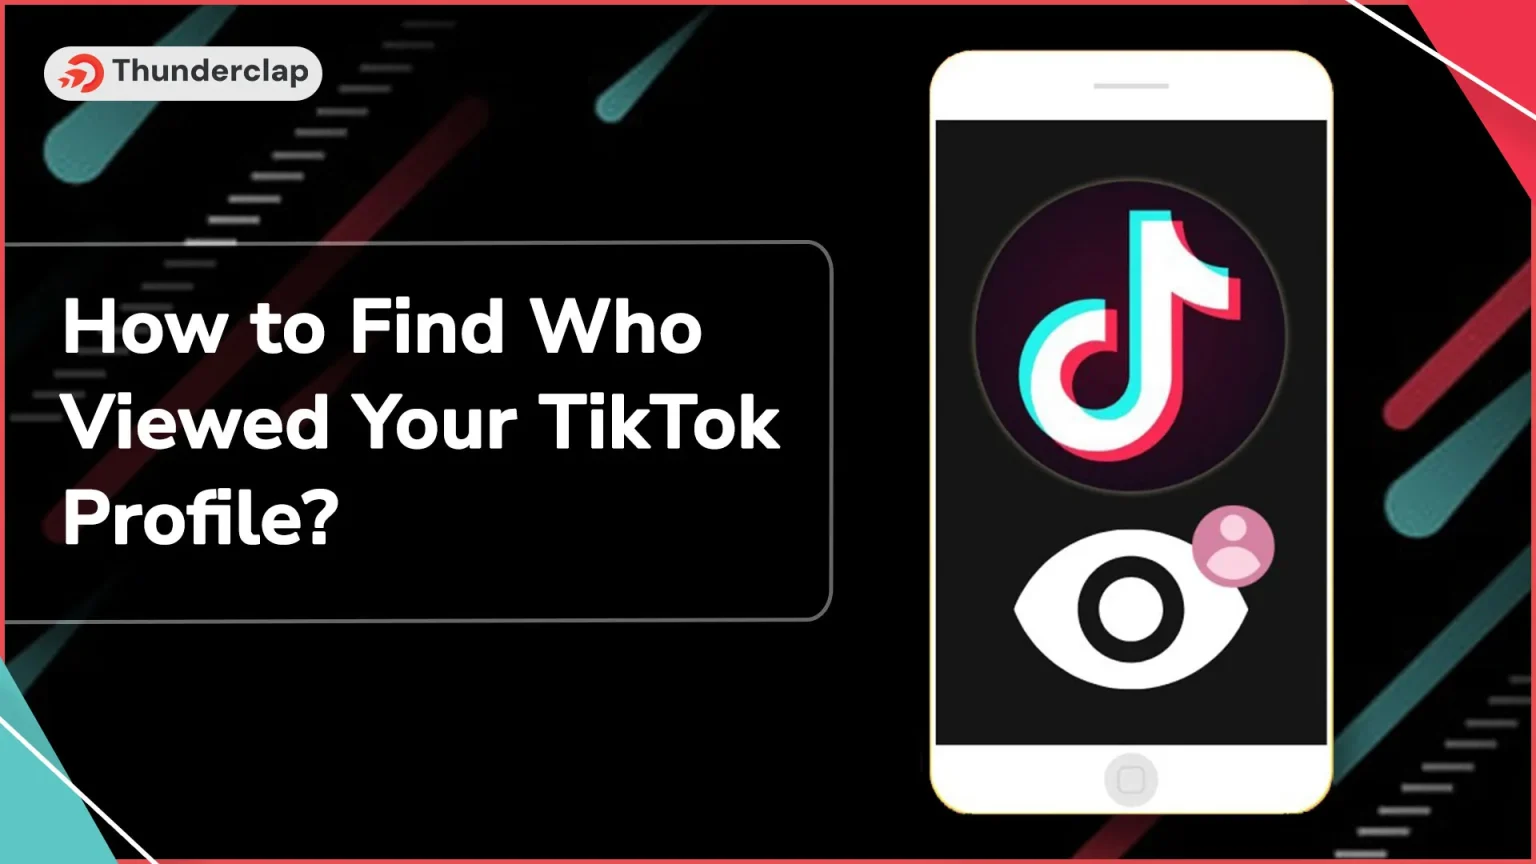 How To Find Who Viewed Your TikTok Profile